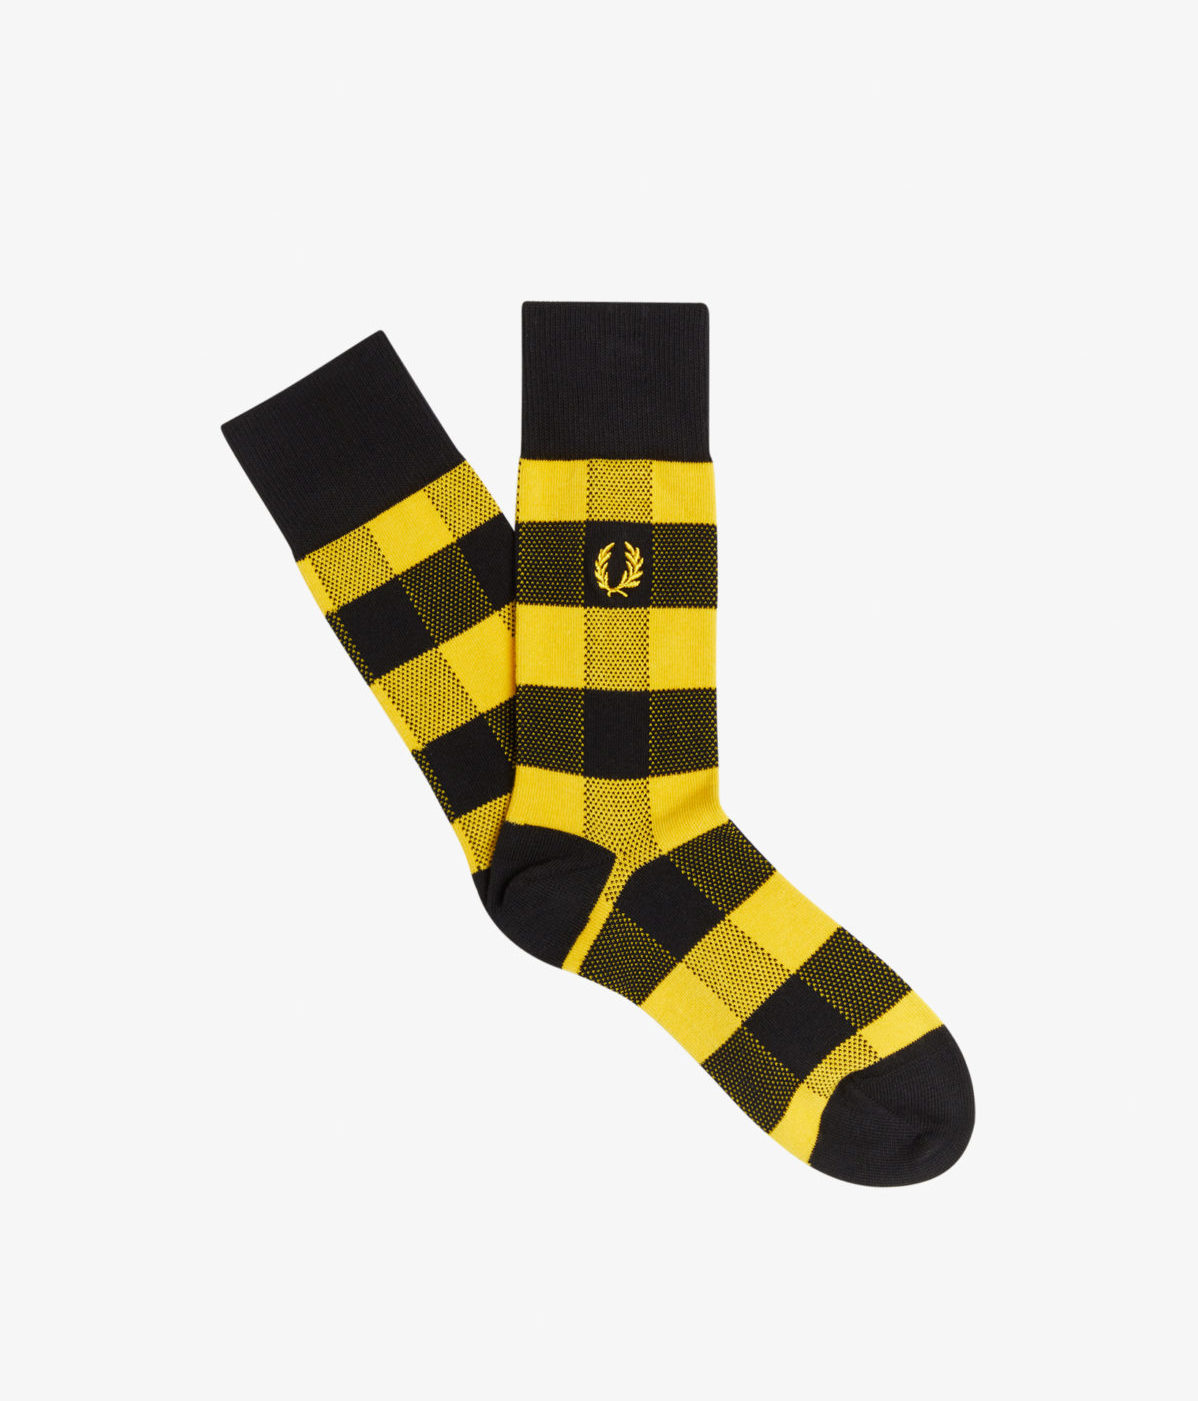 A flat lay fashion image showcasing a pair of black and yellow socks from Fred Perry, professionally captured by I Heart Studios.